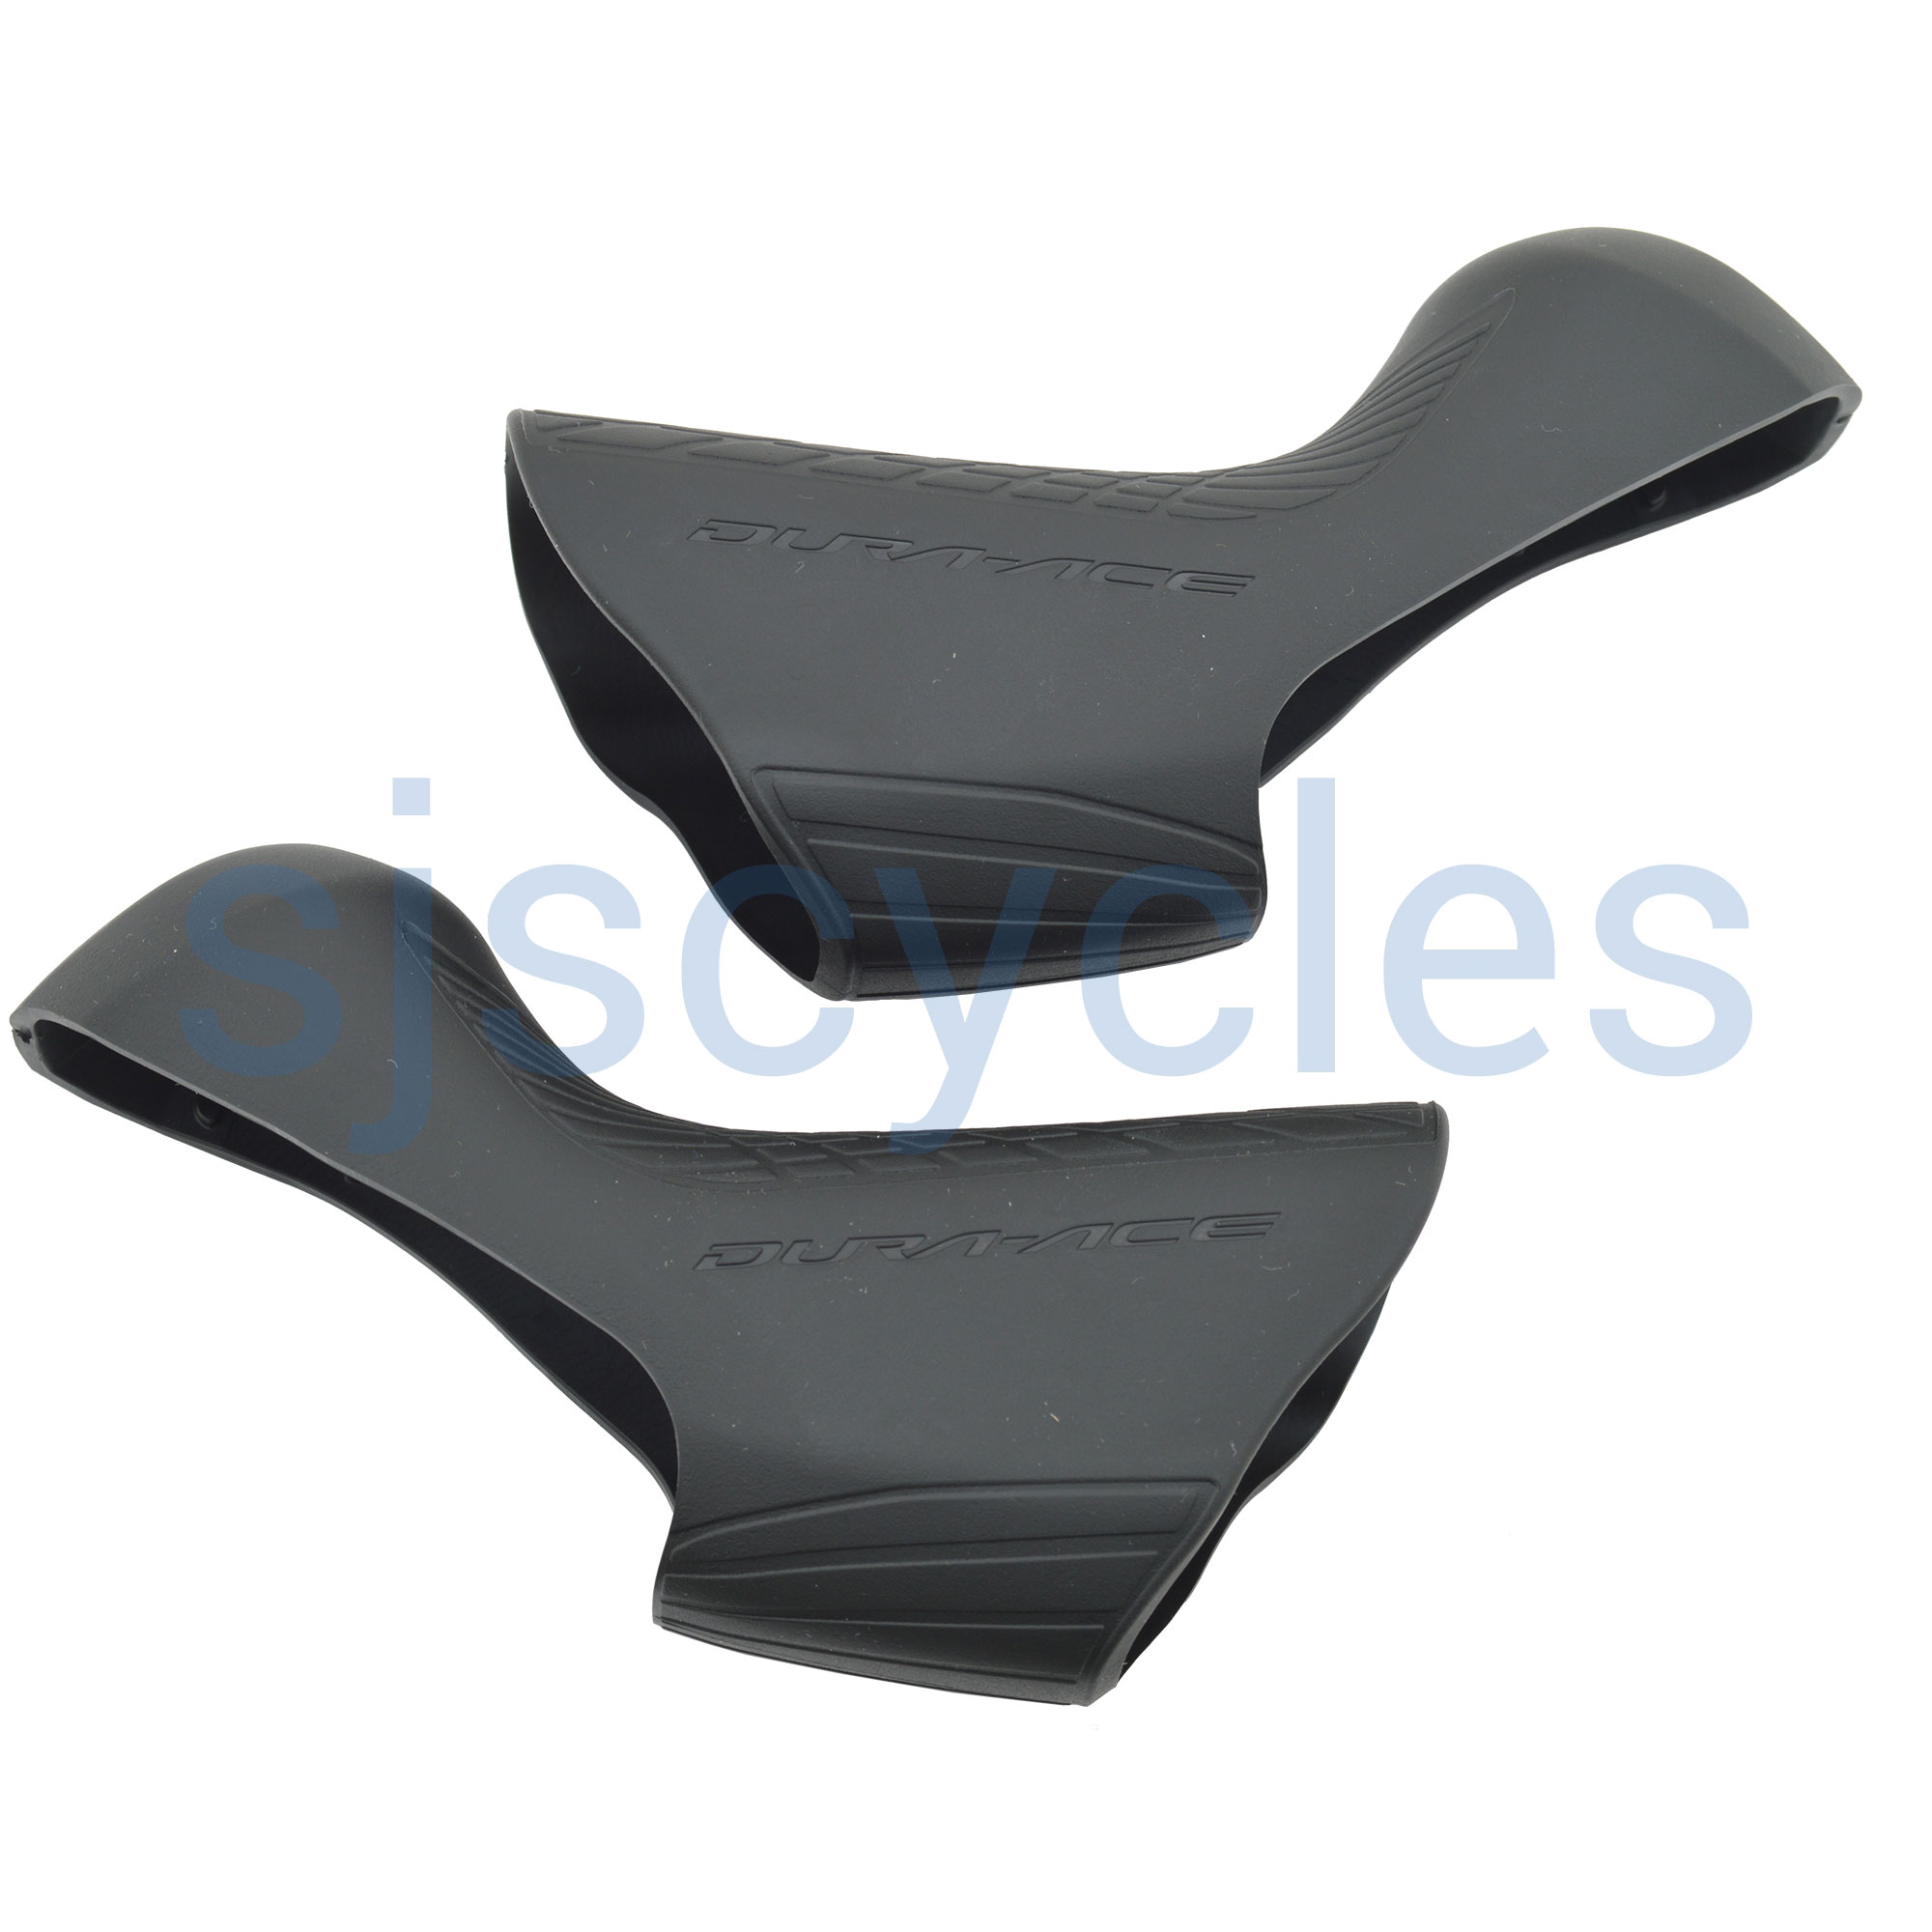 Shimano Dura-Ace ST-R9100 Bracket Covers - Y0BF98010